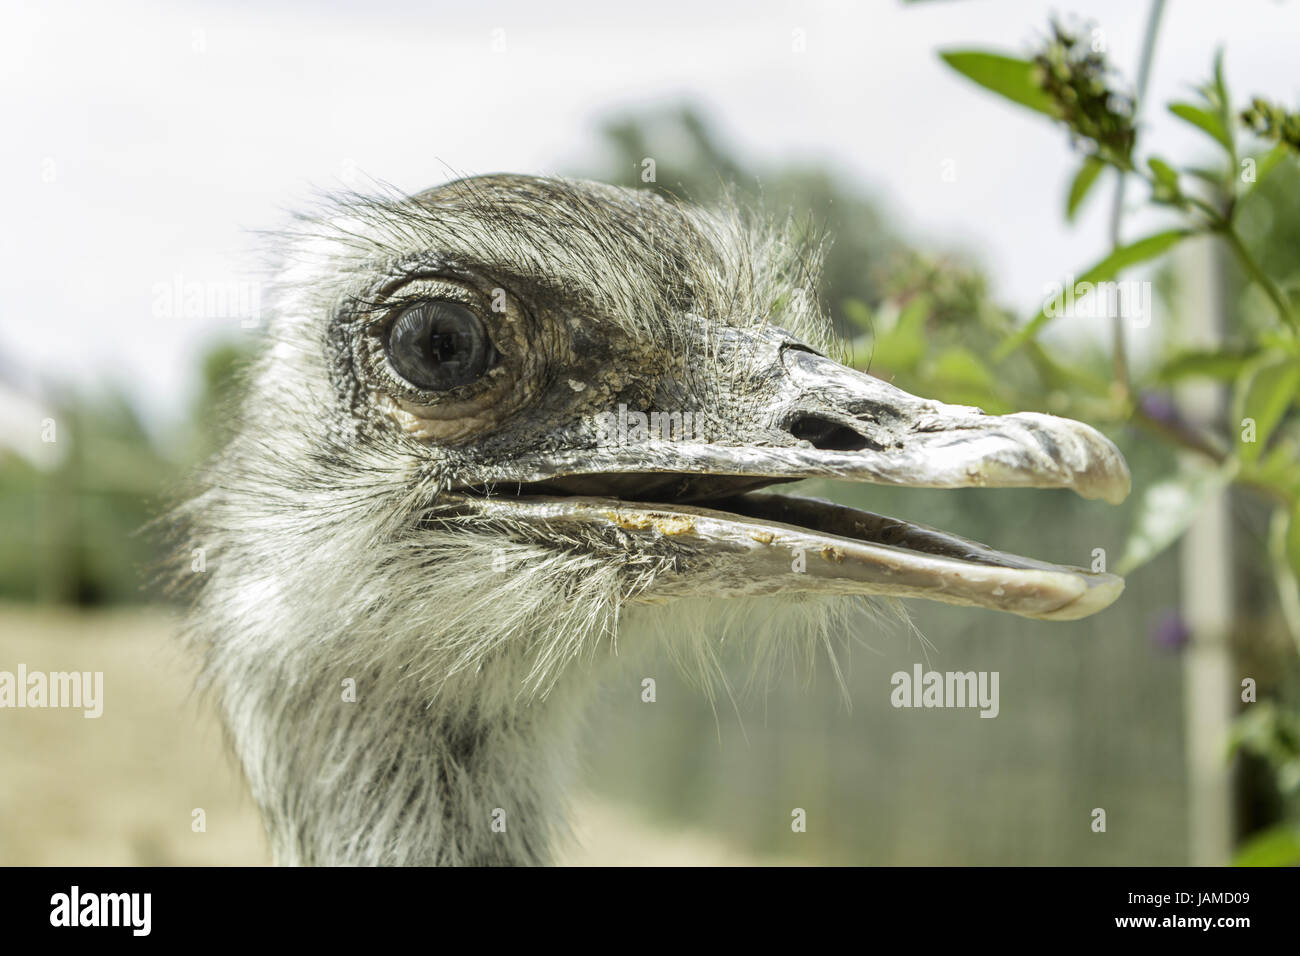 Ostrich head with open beak in zoo animals Stock Photo